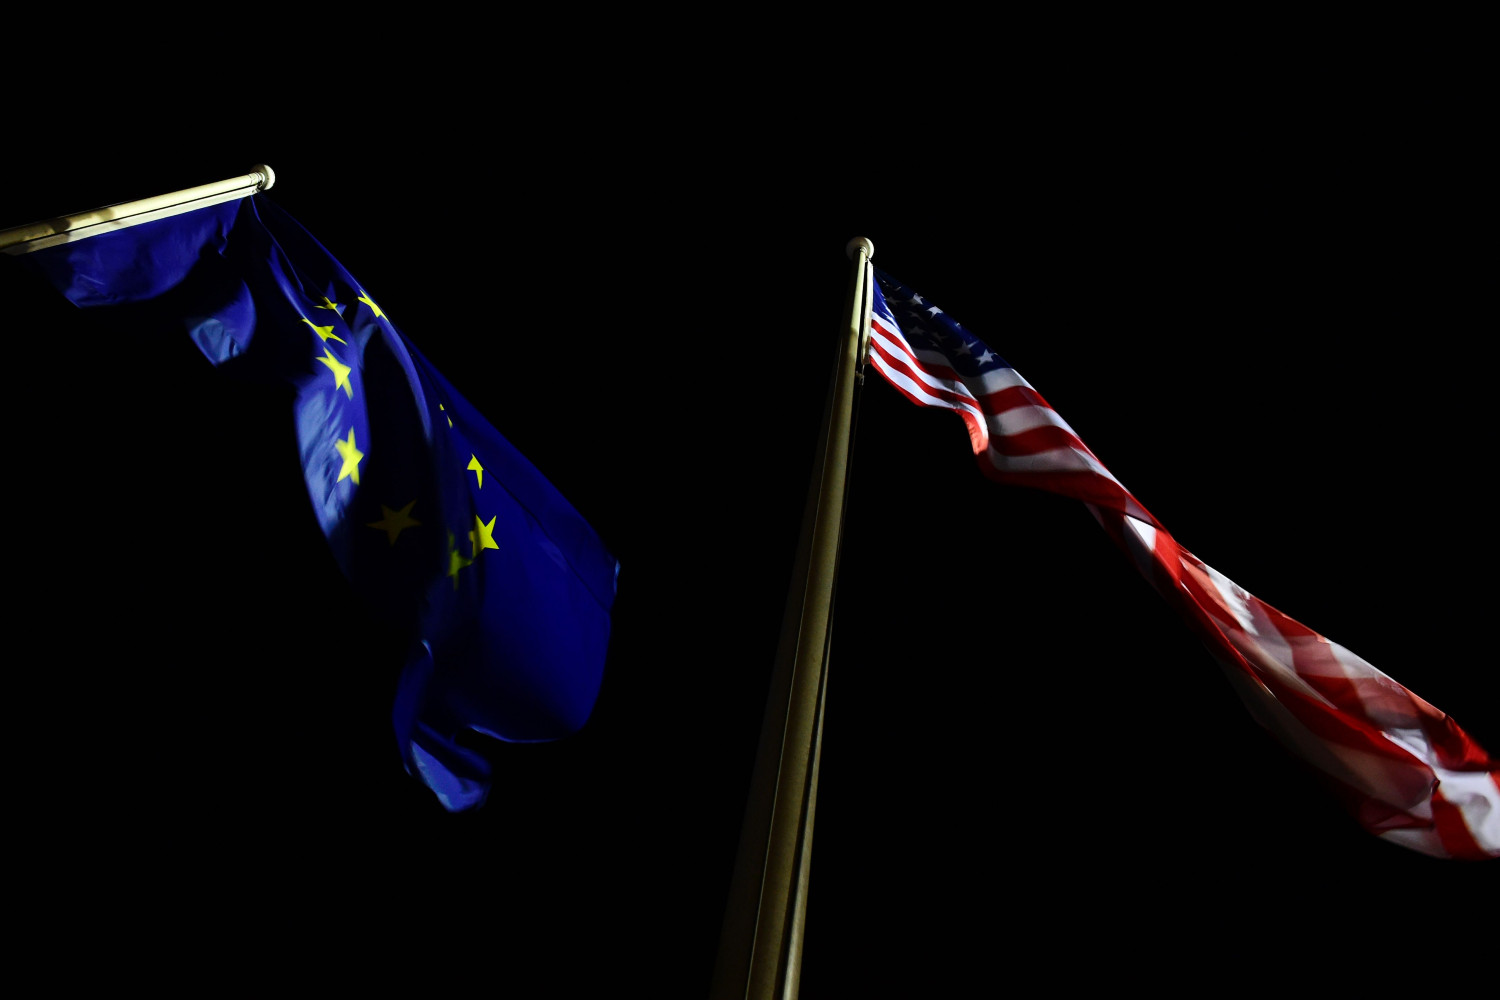 European Union and United States flags flutter at night (Photo: Tobias Schwarz / AFP via Getty Images)